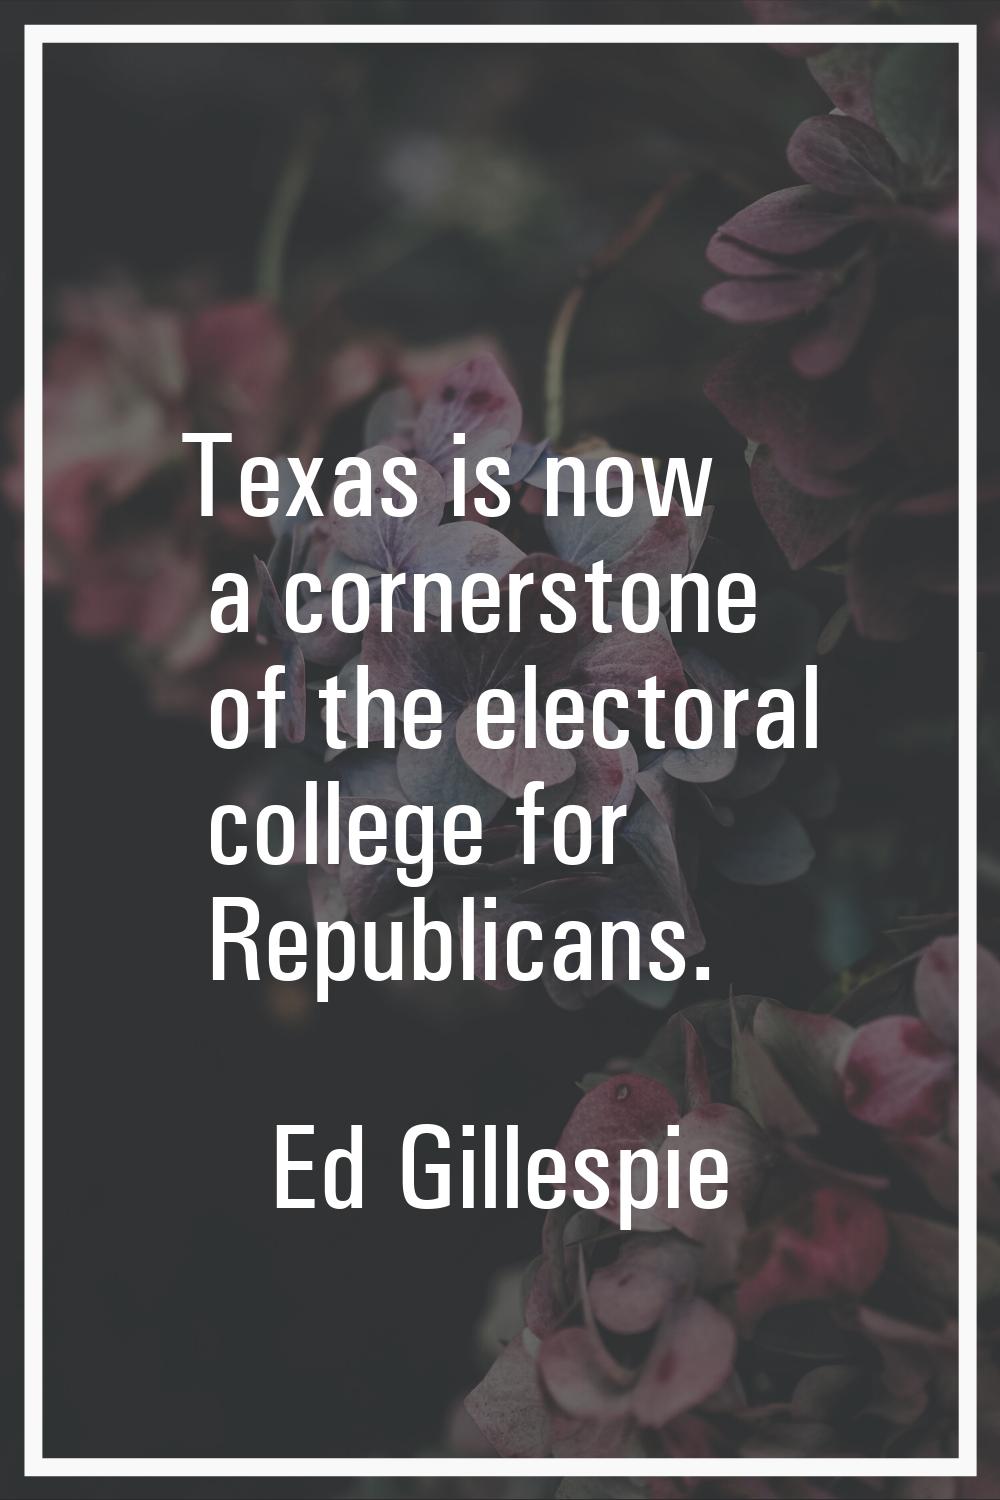 Texas is now a cornerstone of the electoral college for Republicans.